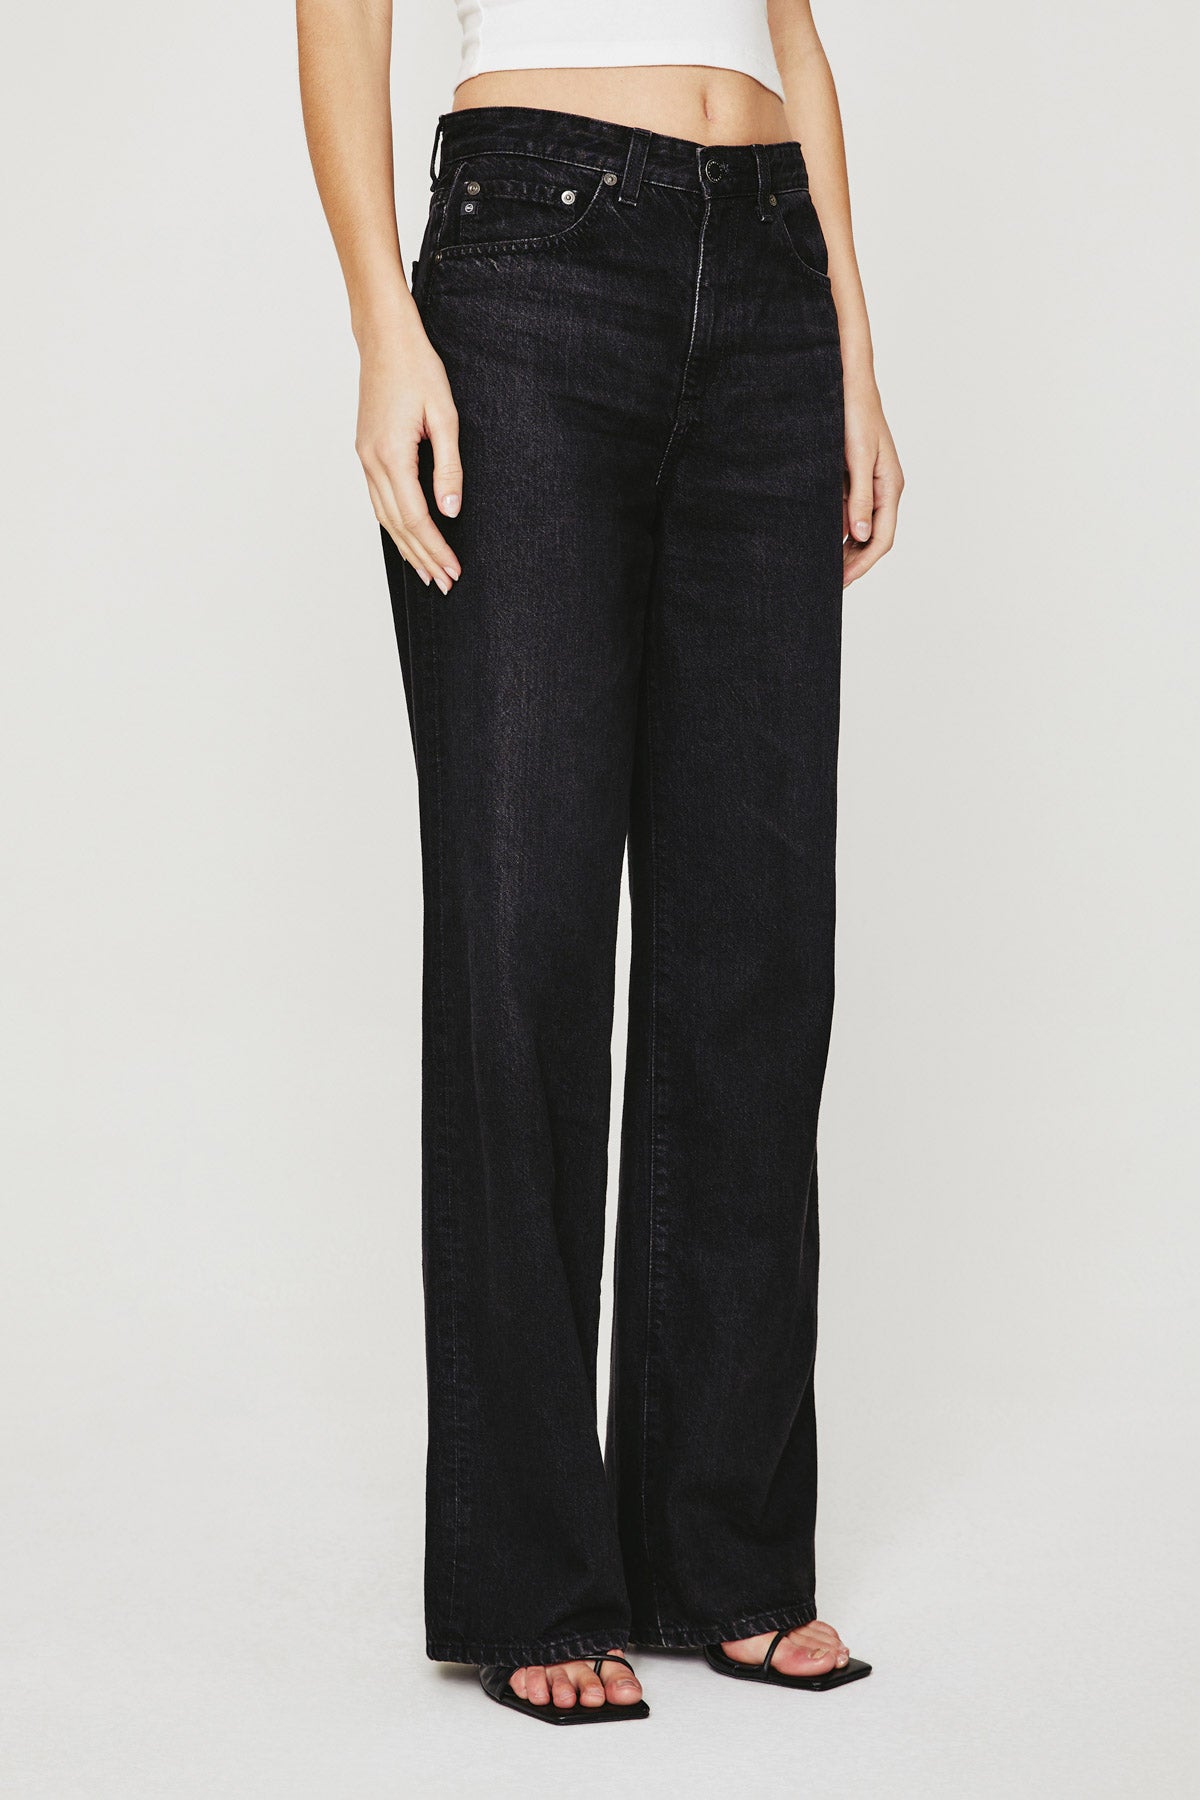 ag jeans kora high rise wide leg jean in madison black, front view